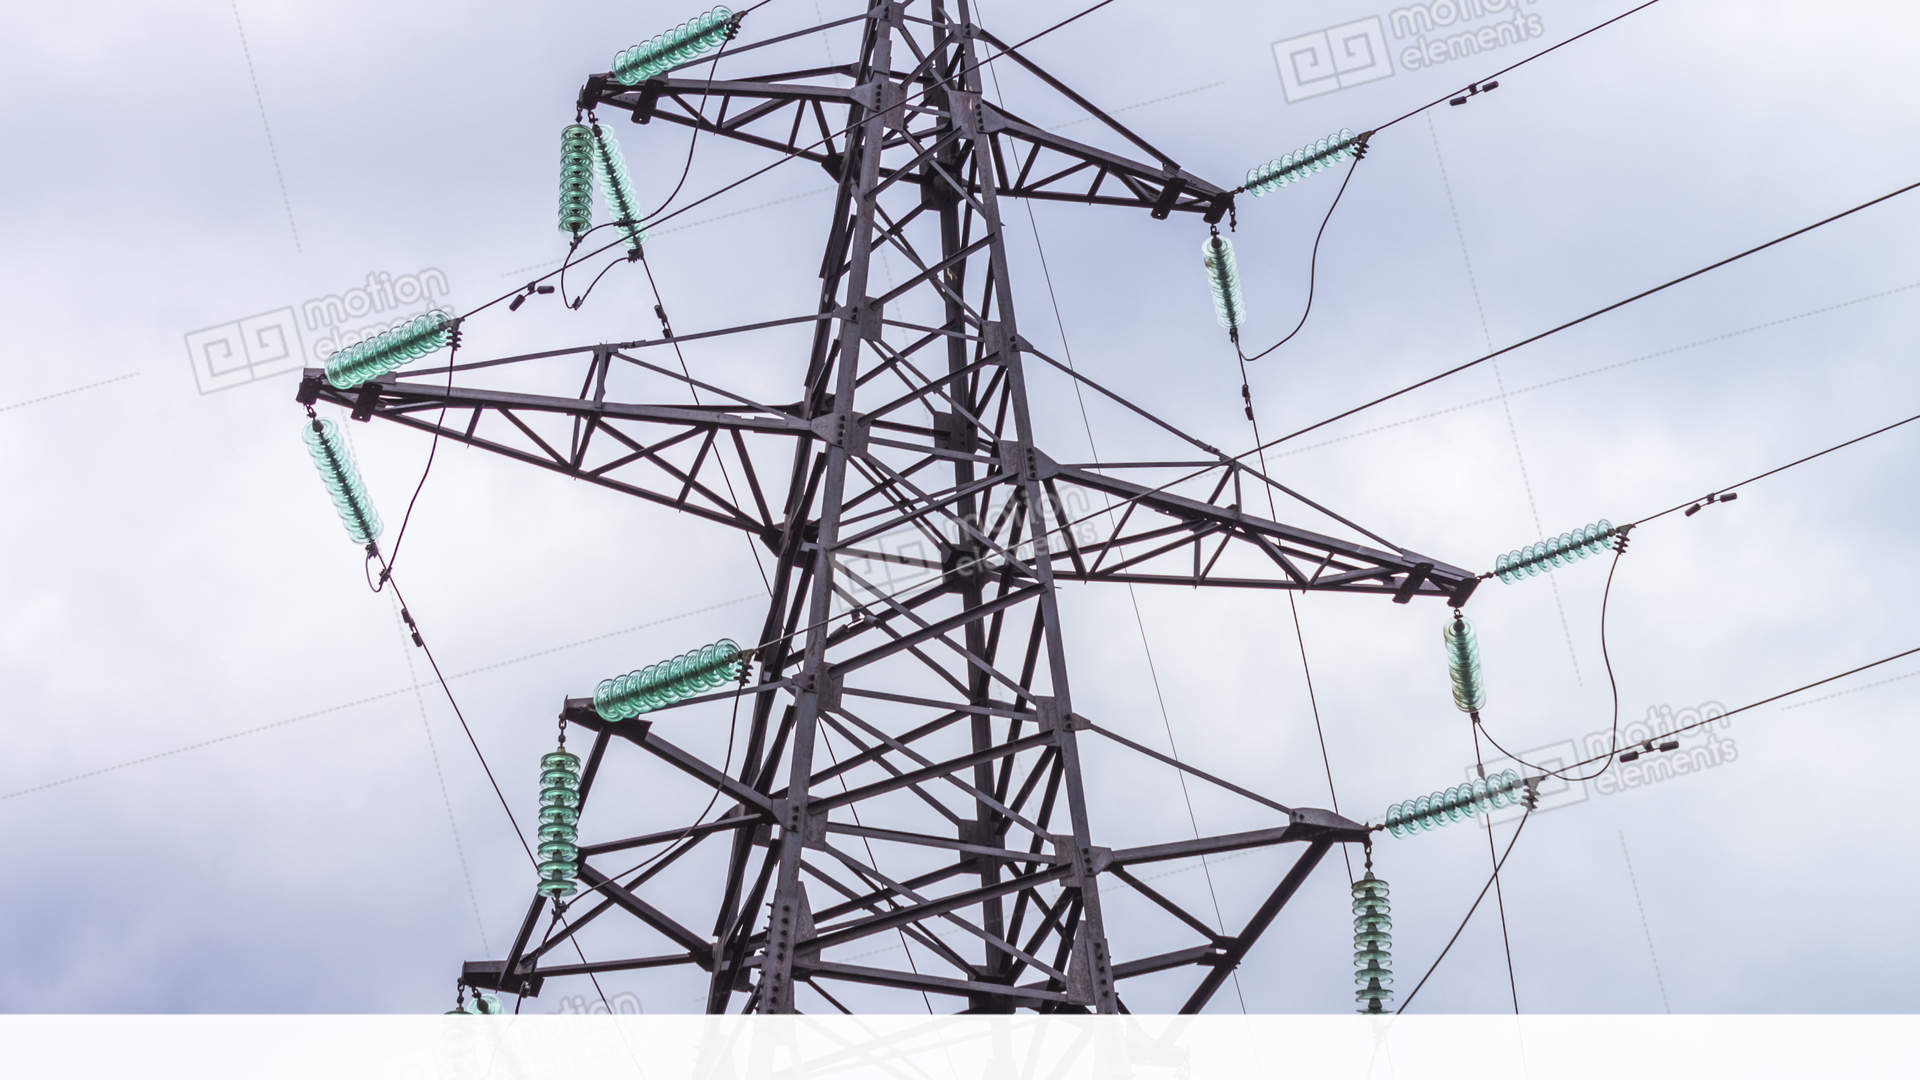 Electrical Supports And Power Lines. Energy Industry. Production And ...